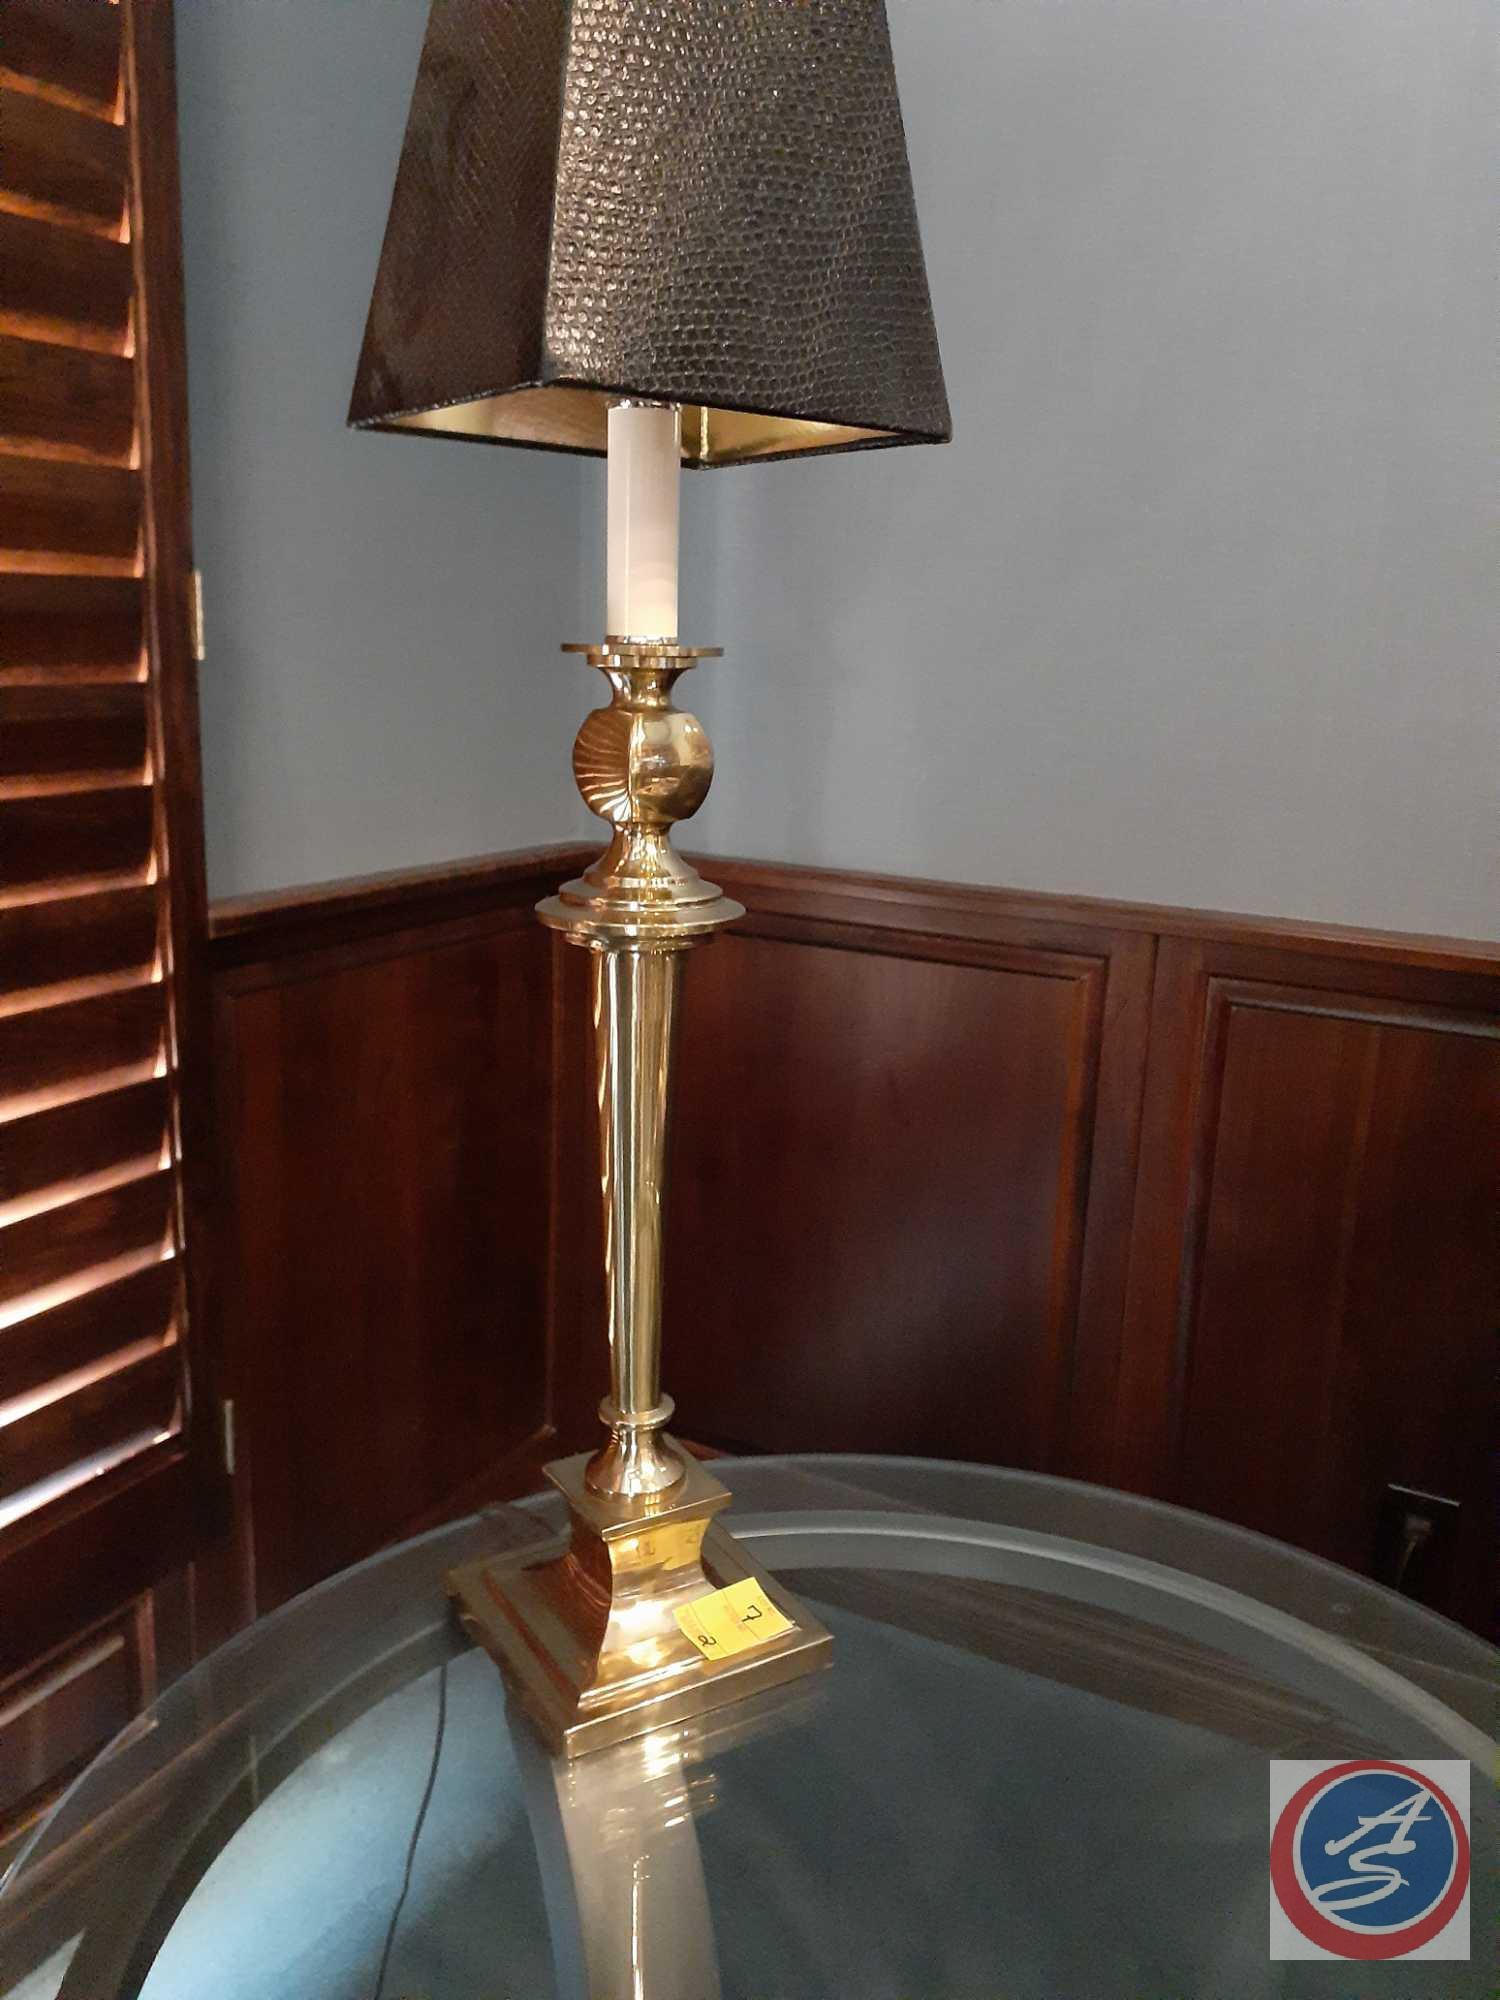 (2) Sunset Lamp Company Table Lamps